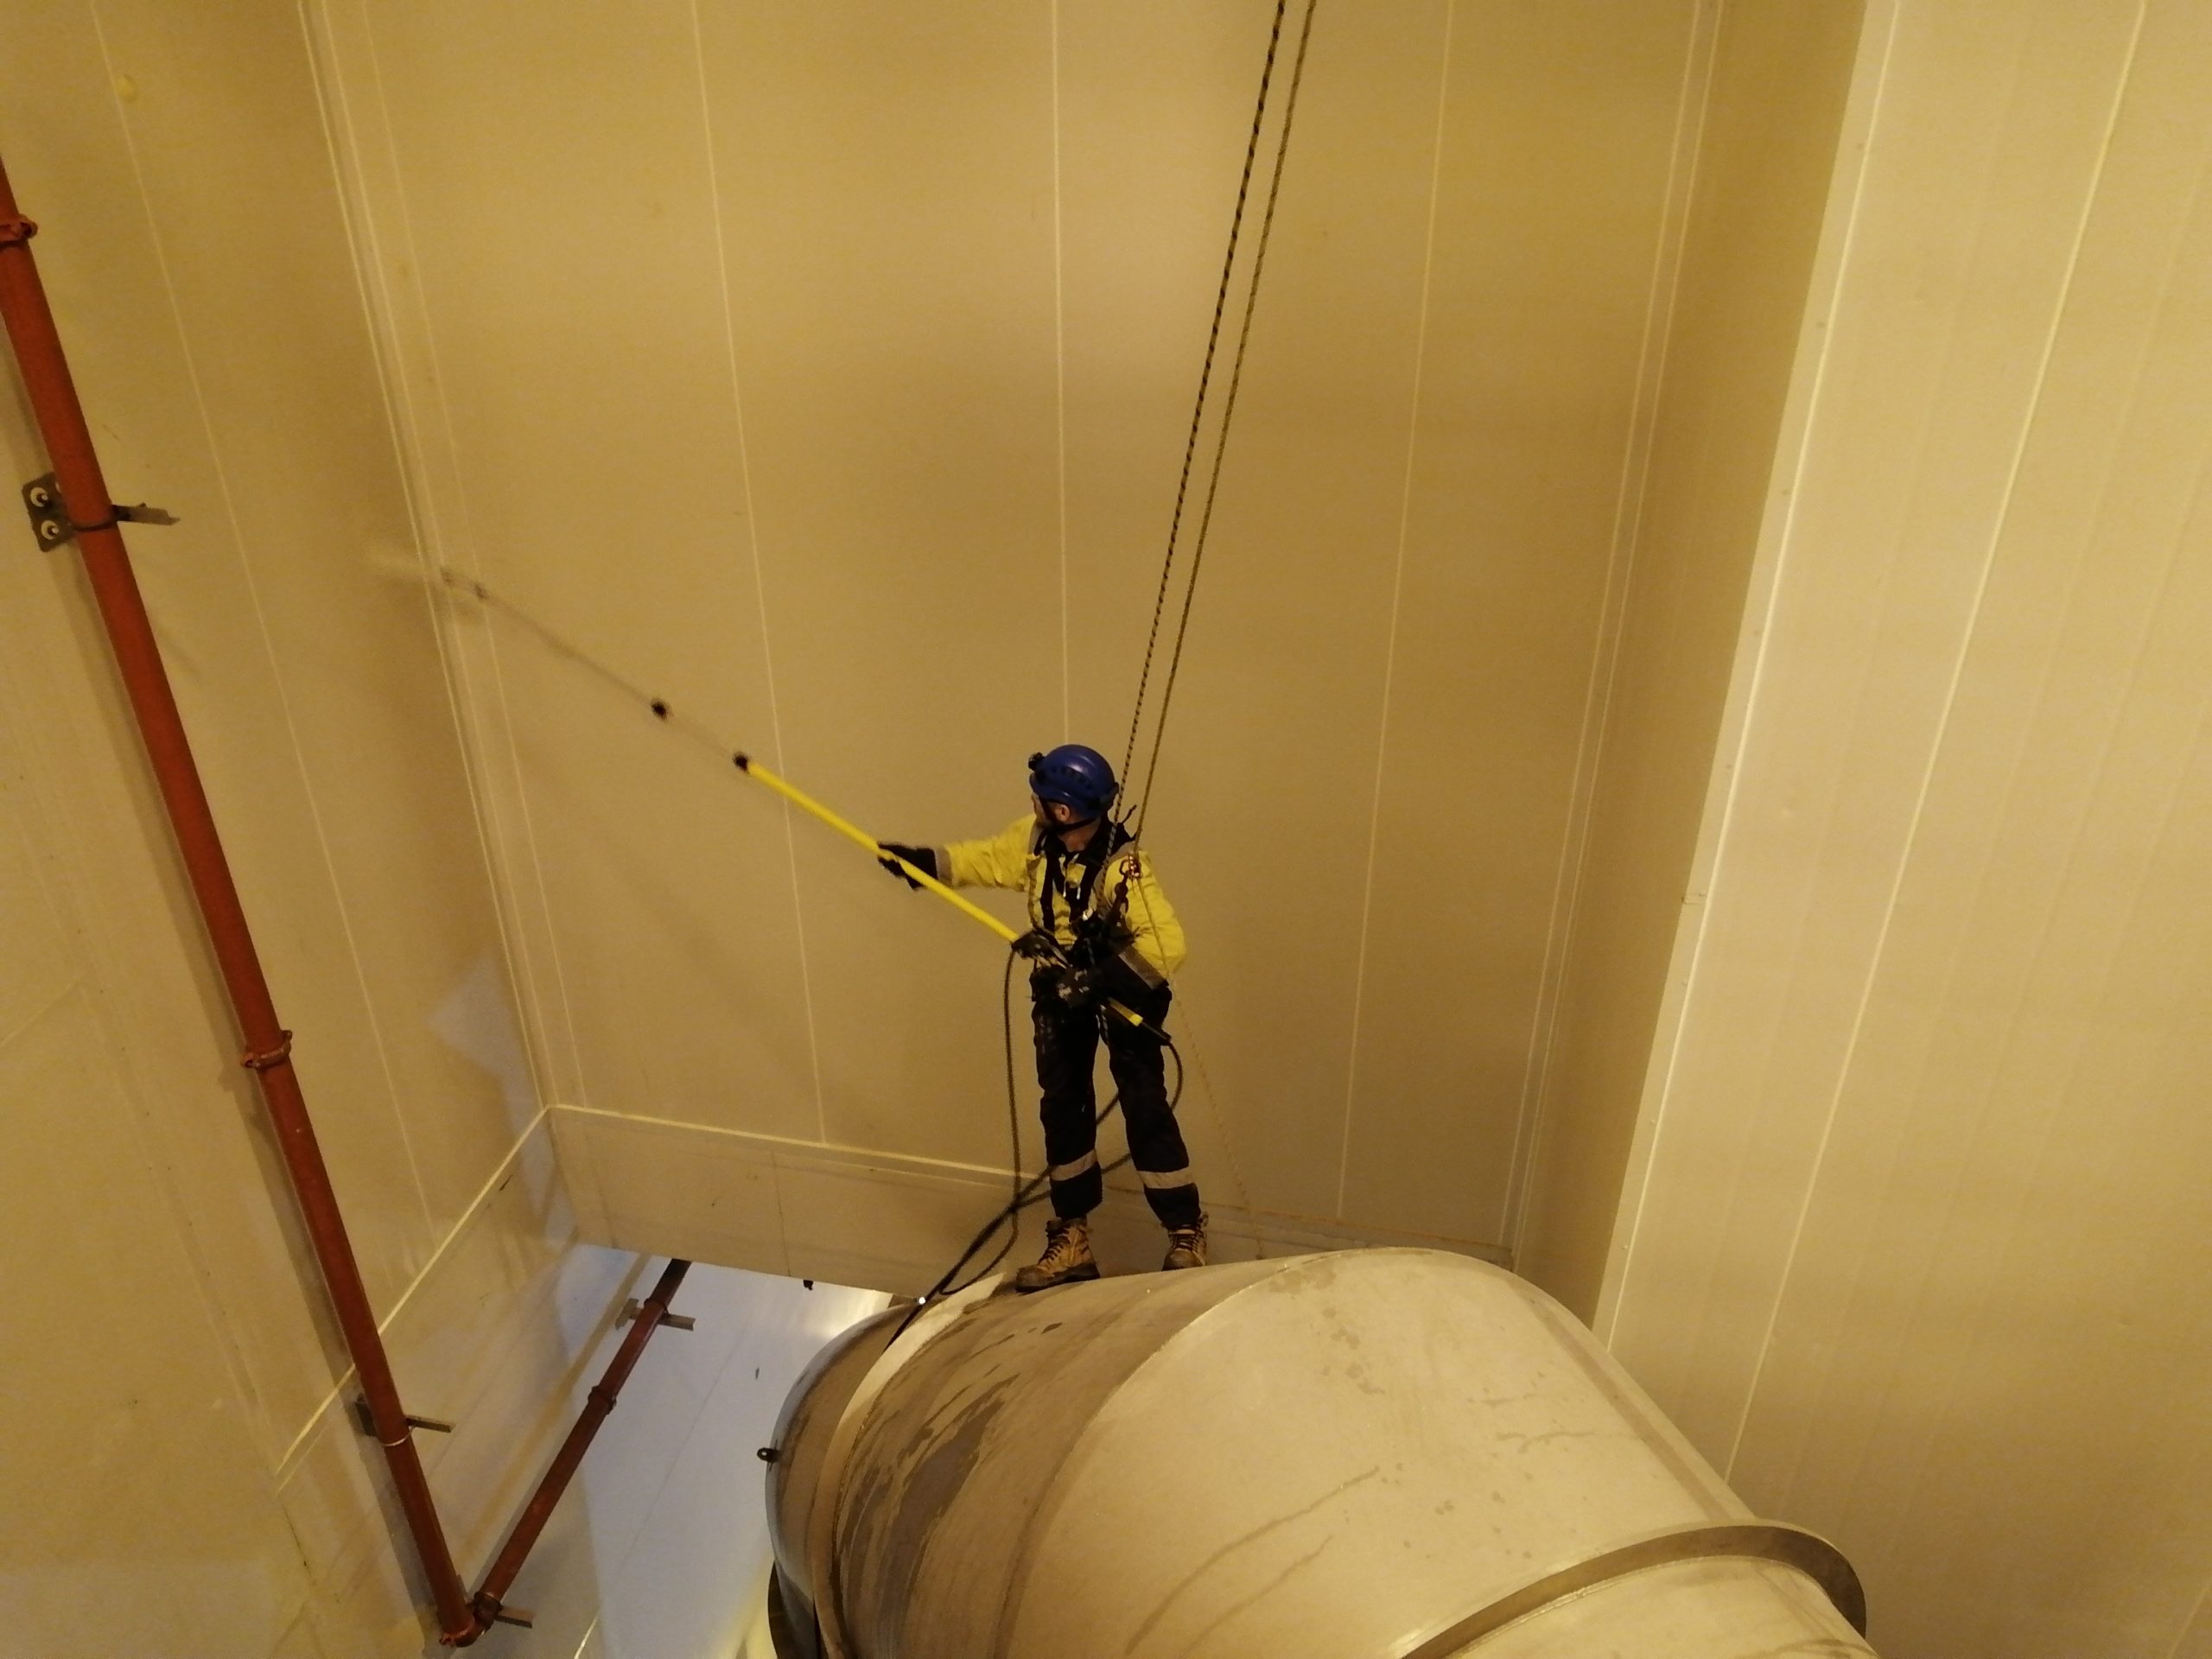 Industrial abseiler using extension waterblaster to reach difficult access areas